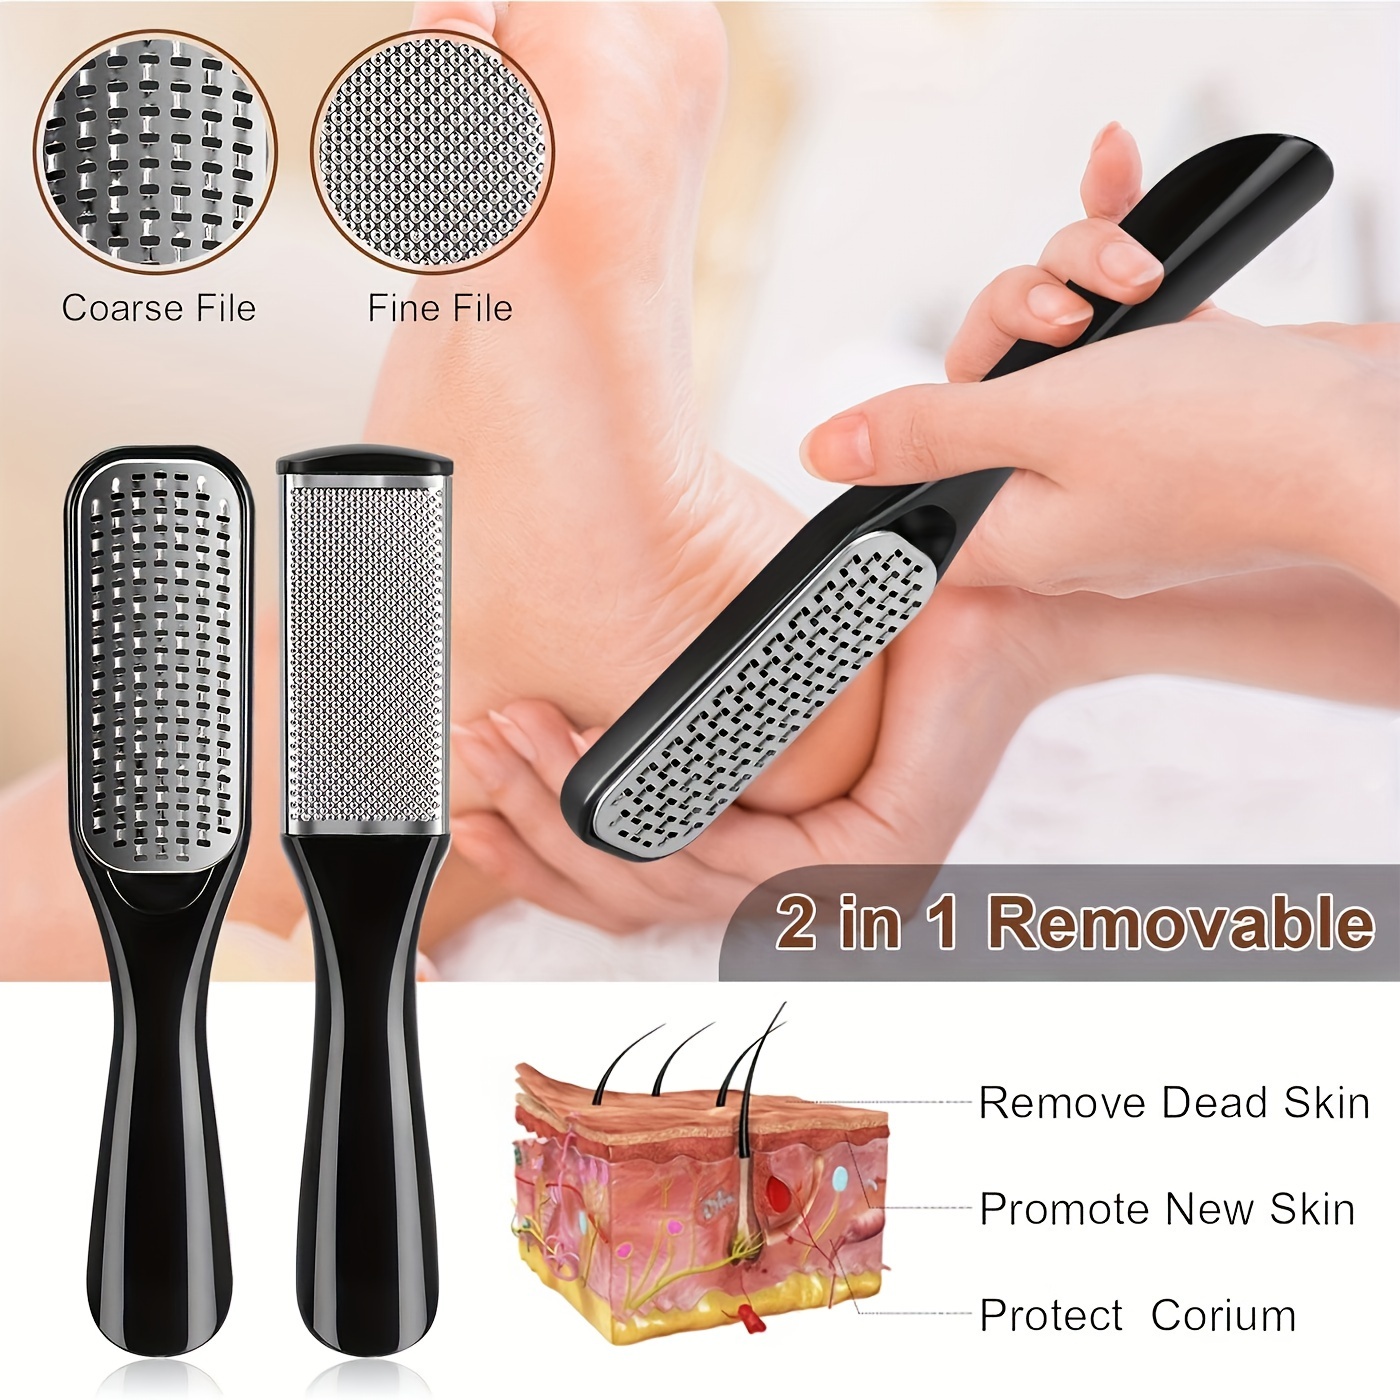 Stainless Steel Foot Skin File, Professional Foot Care Tools